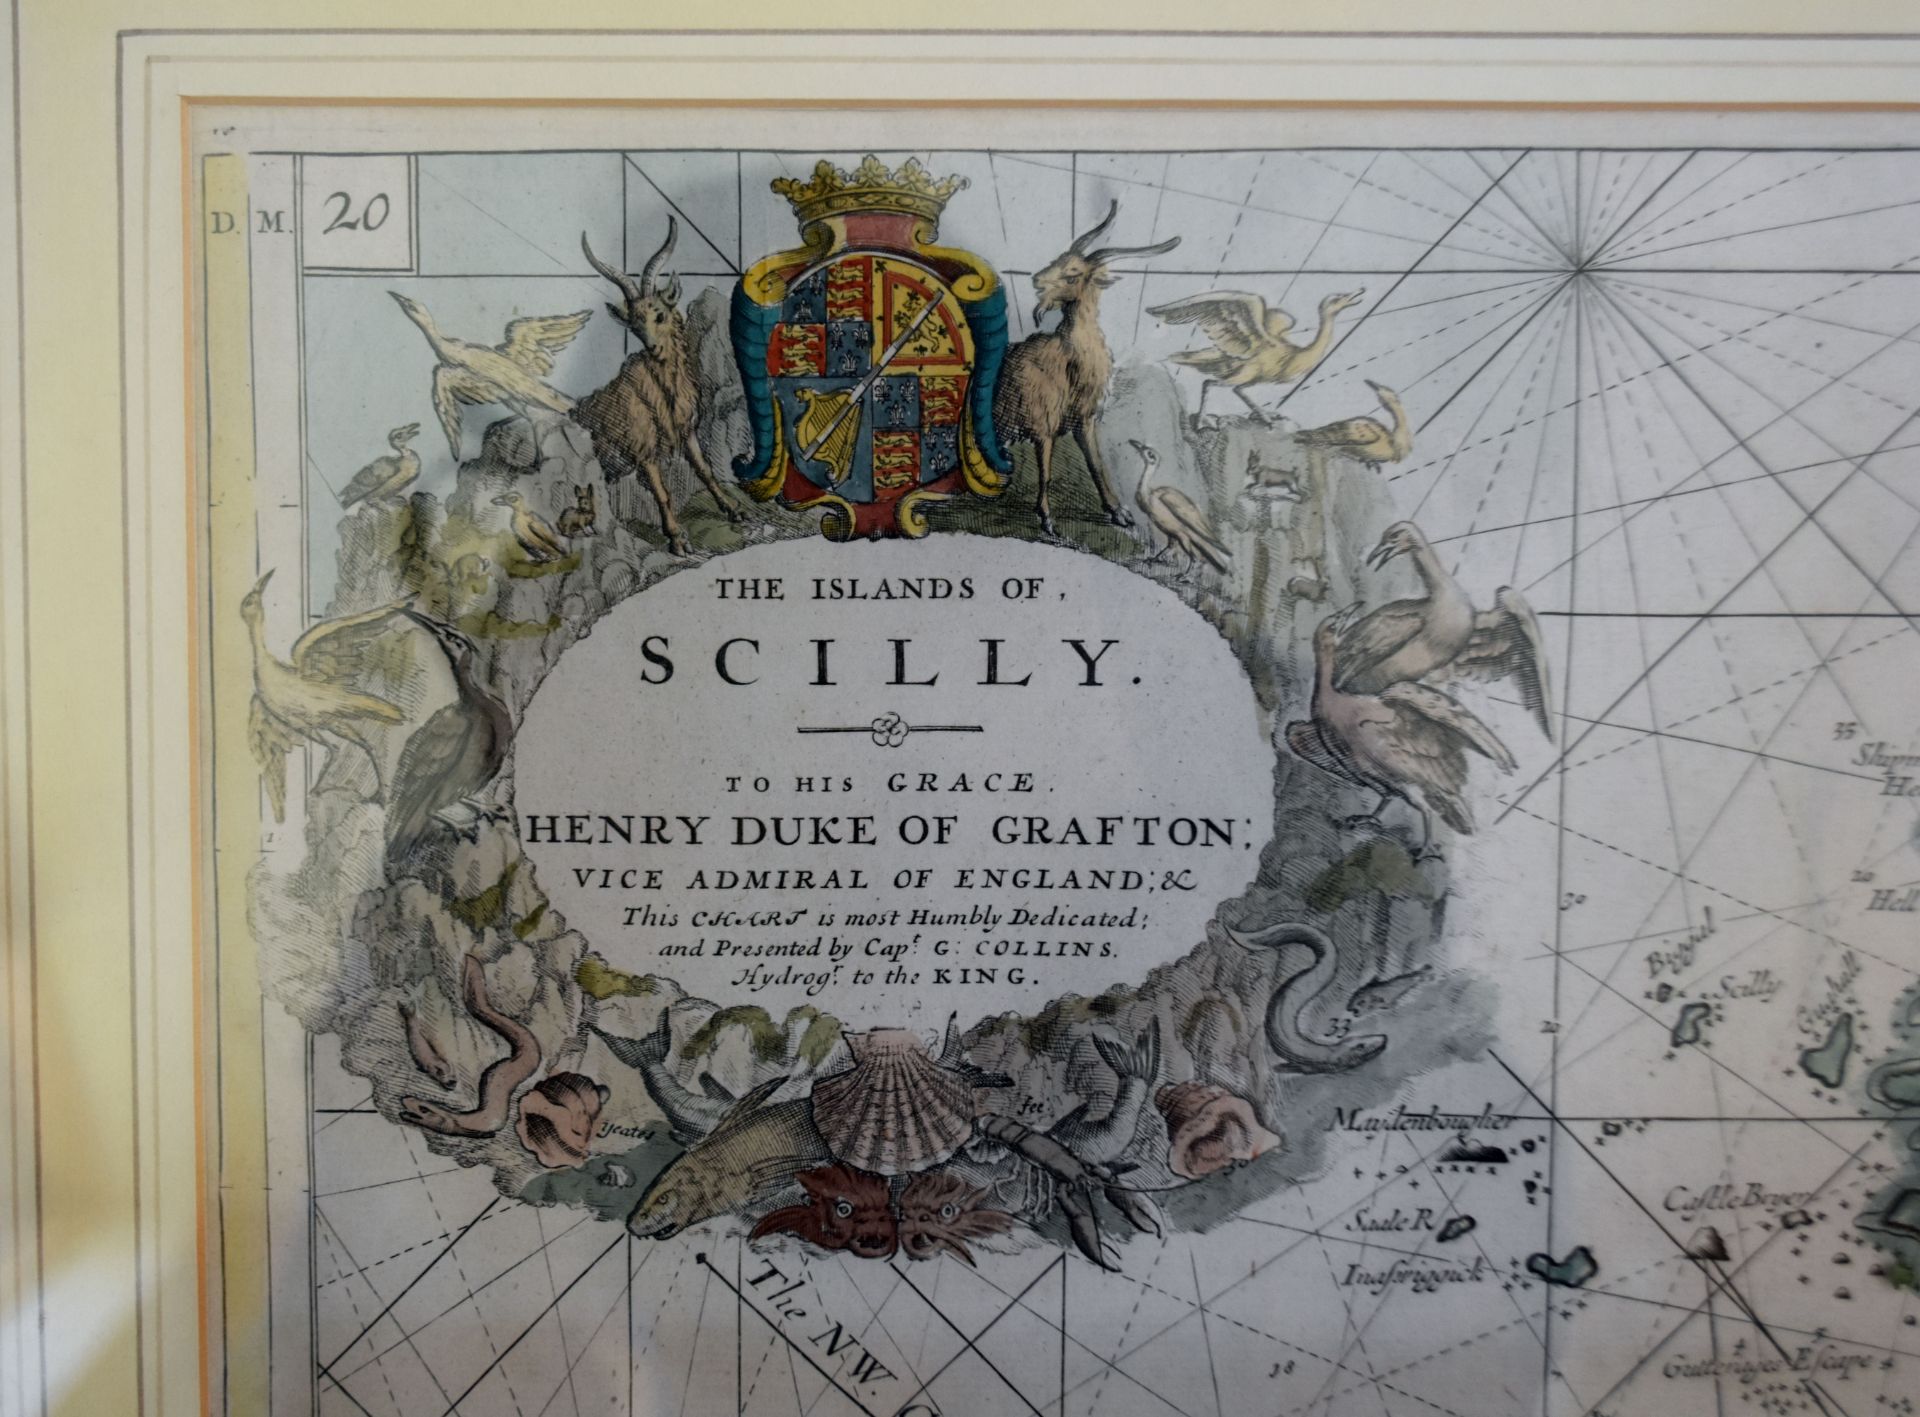 Map of The Isles of Scilly by Captain Greenville Collins c. 1774 - Image 2 of 5